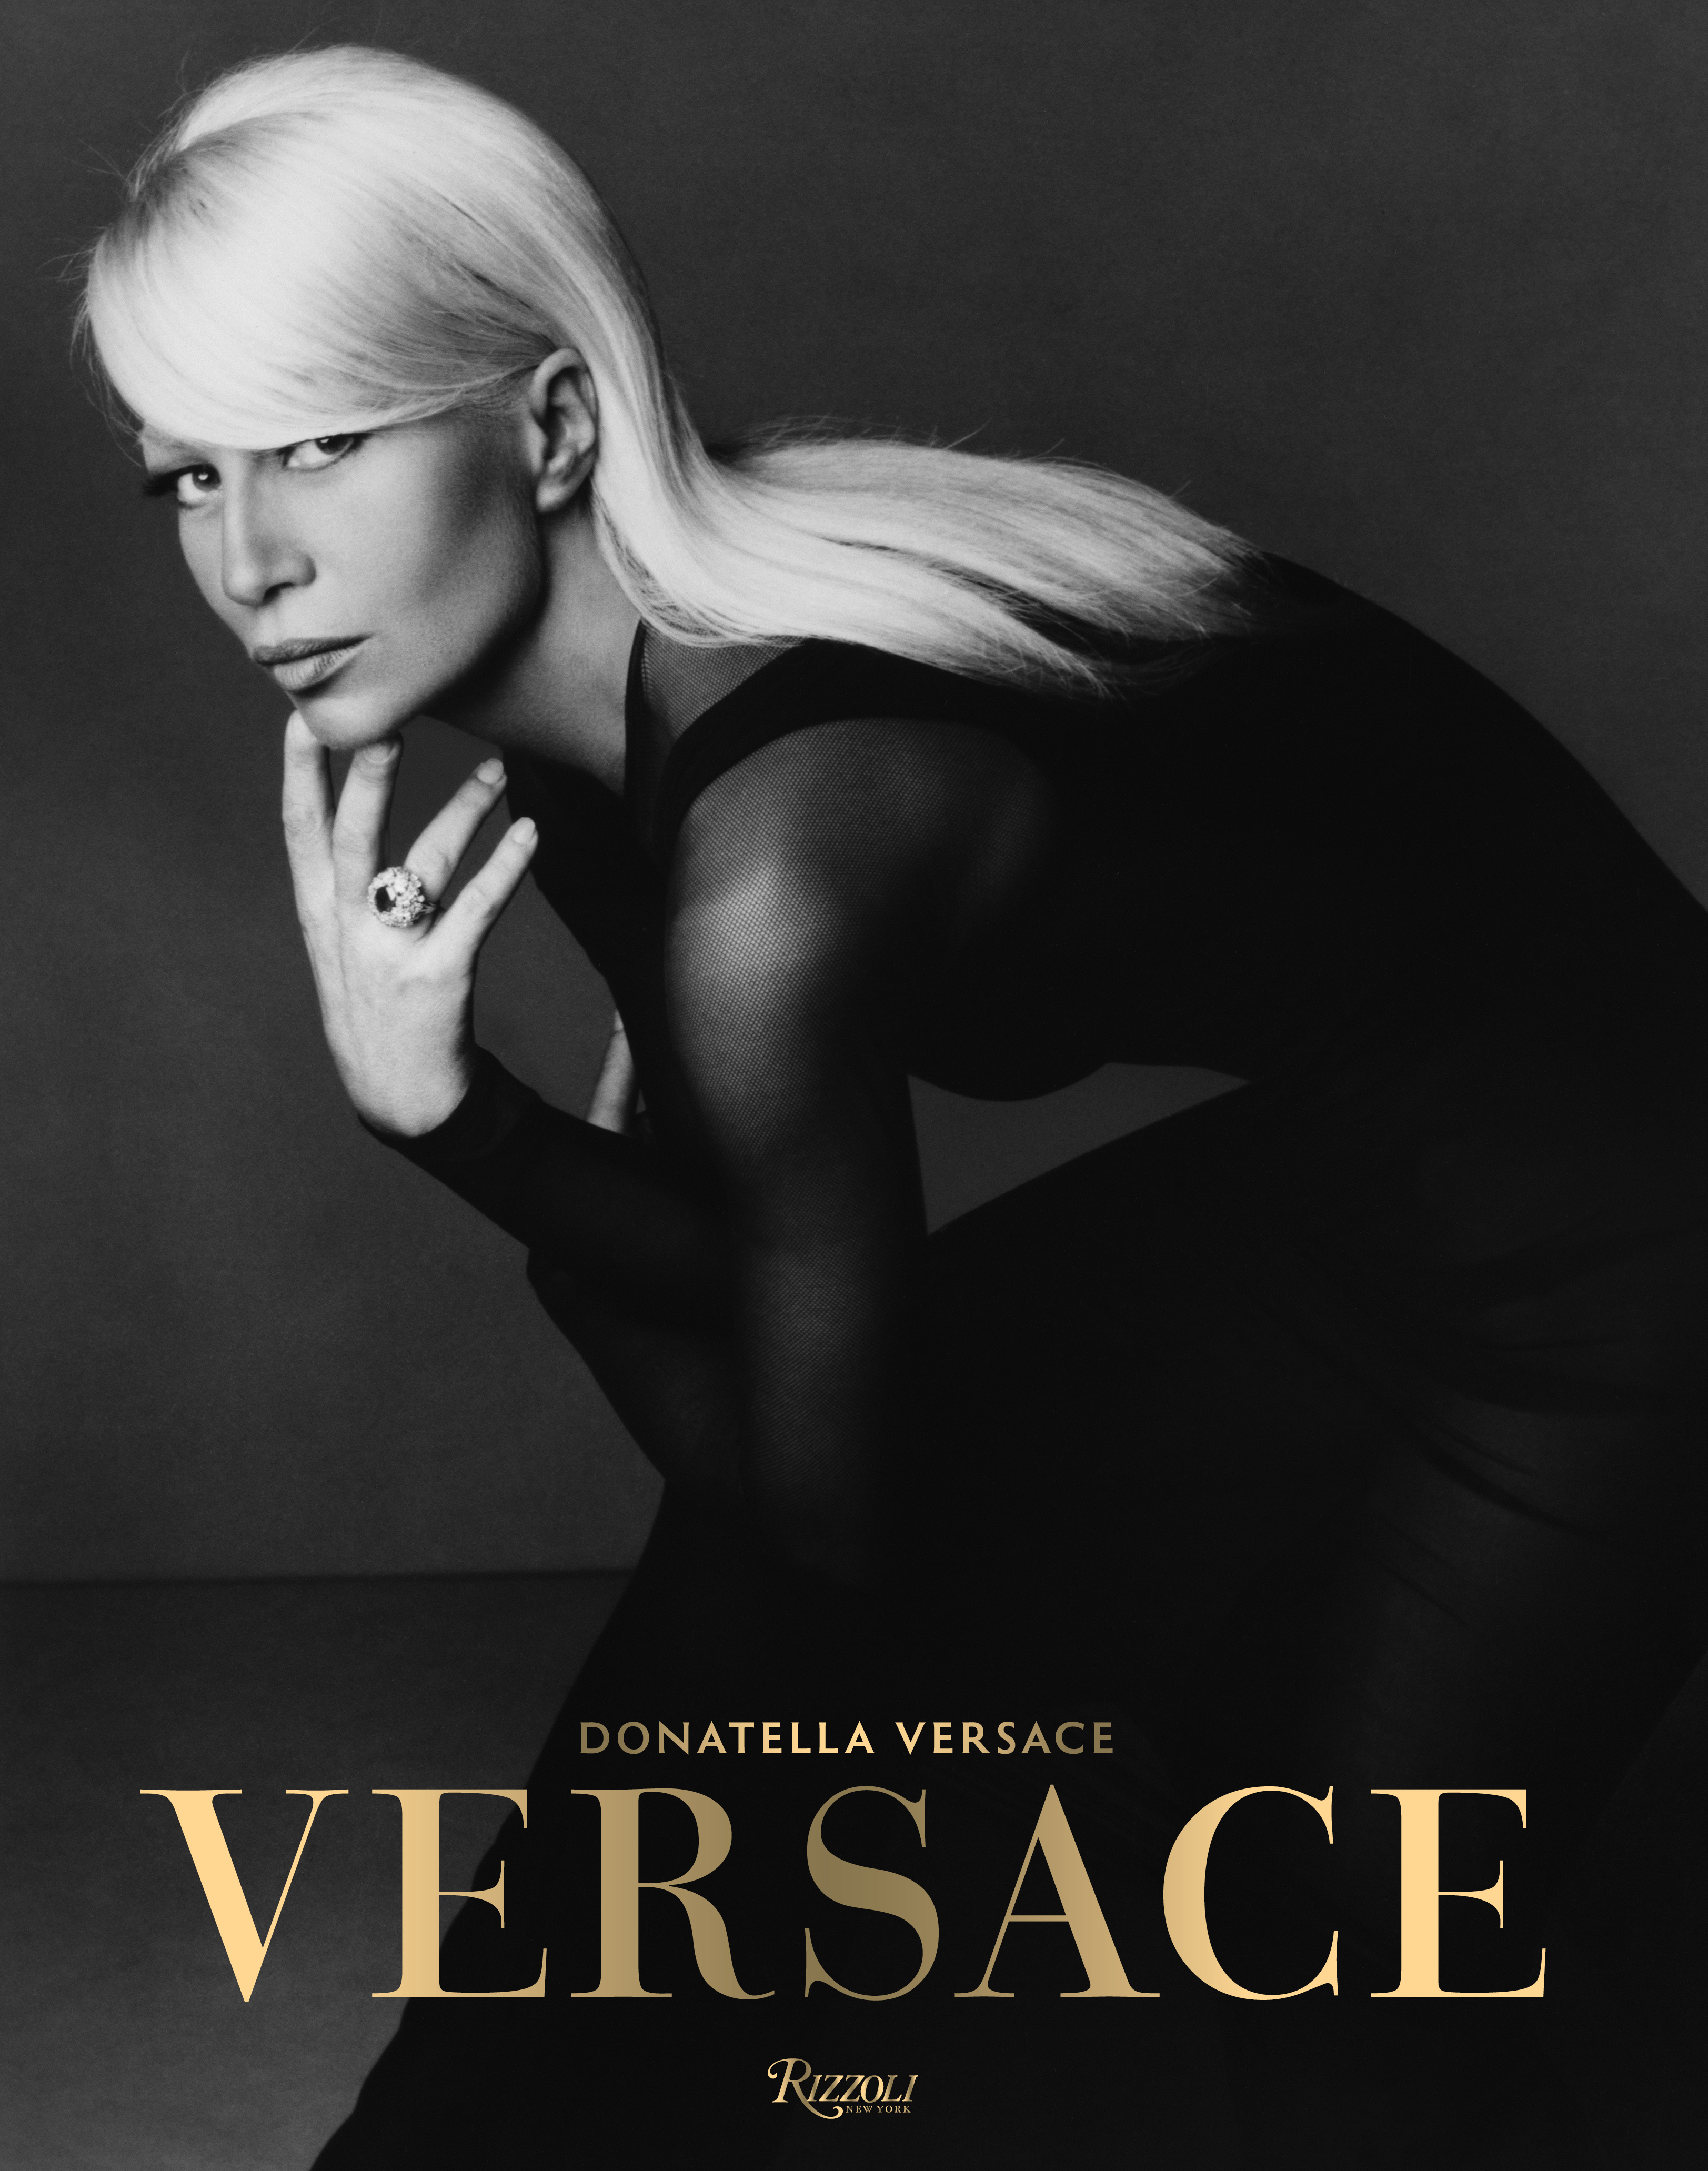 DONATELLA VERSACE LAUNCHES AN INTIMATE BOOK